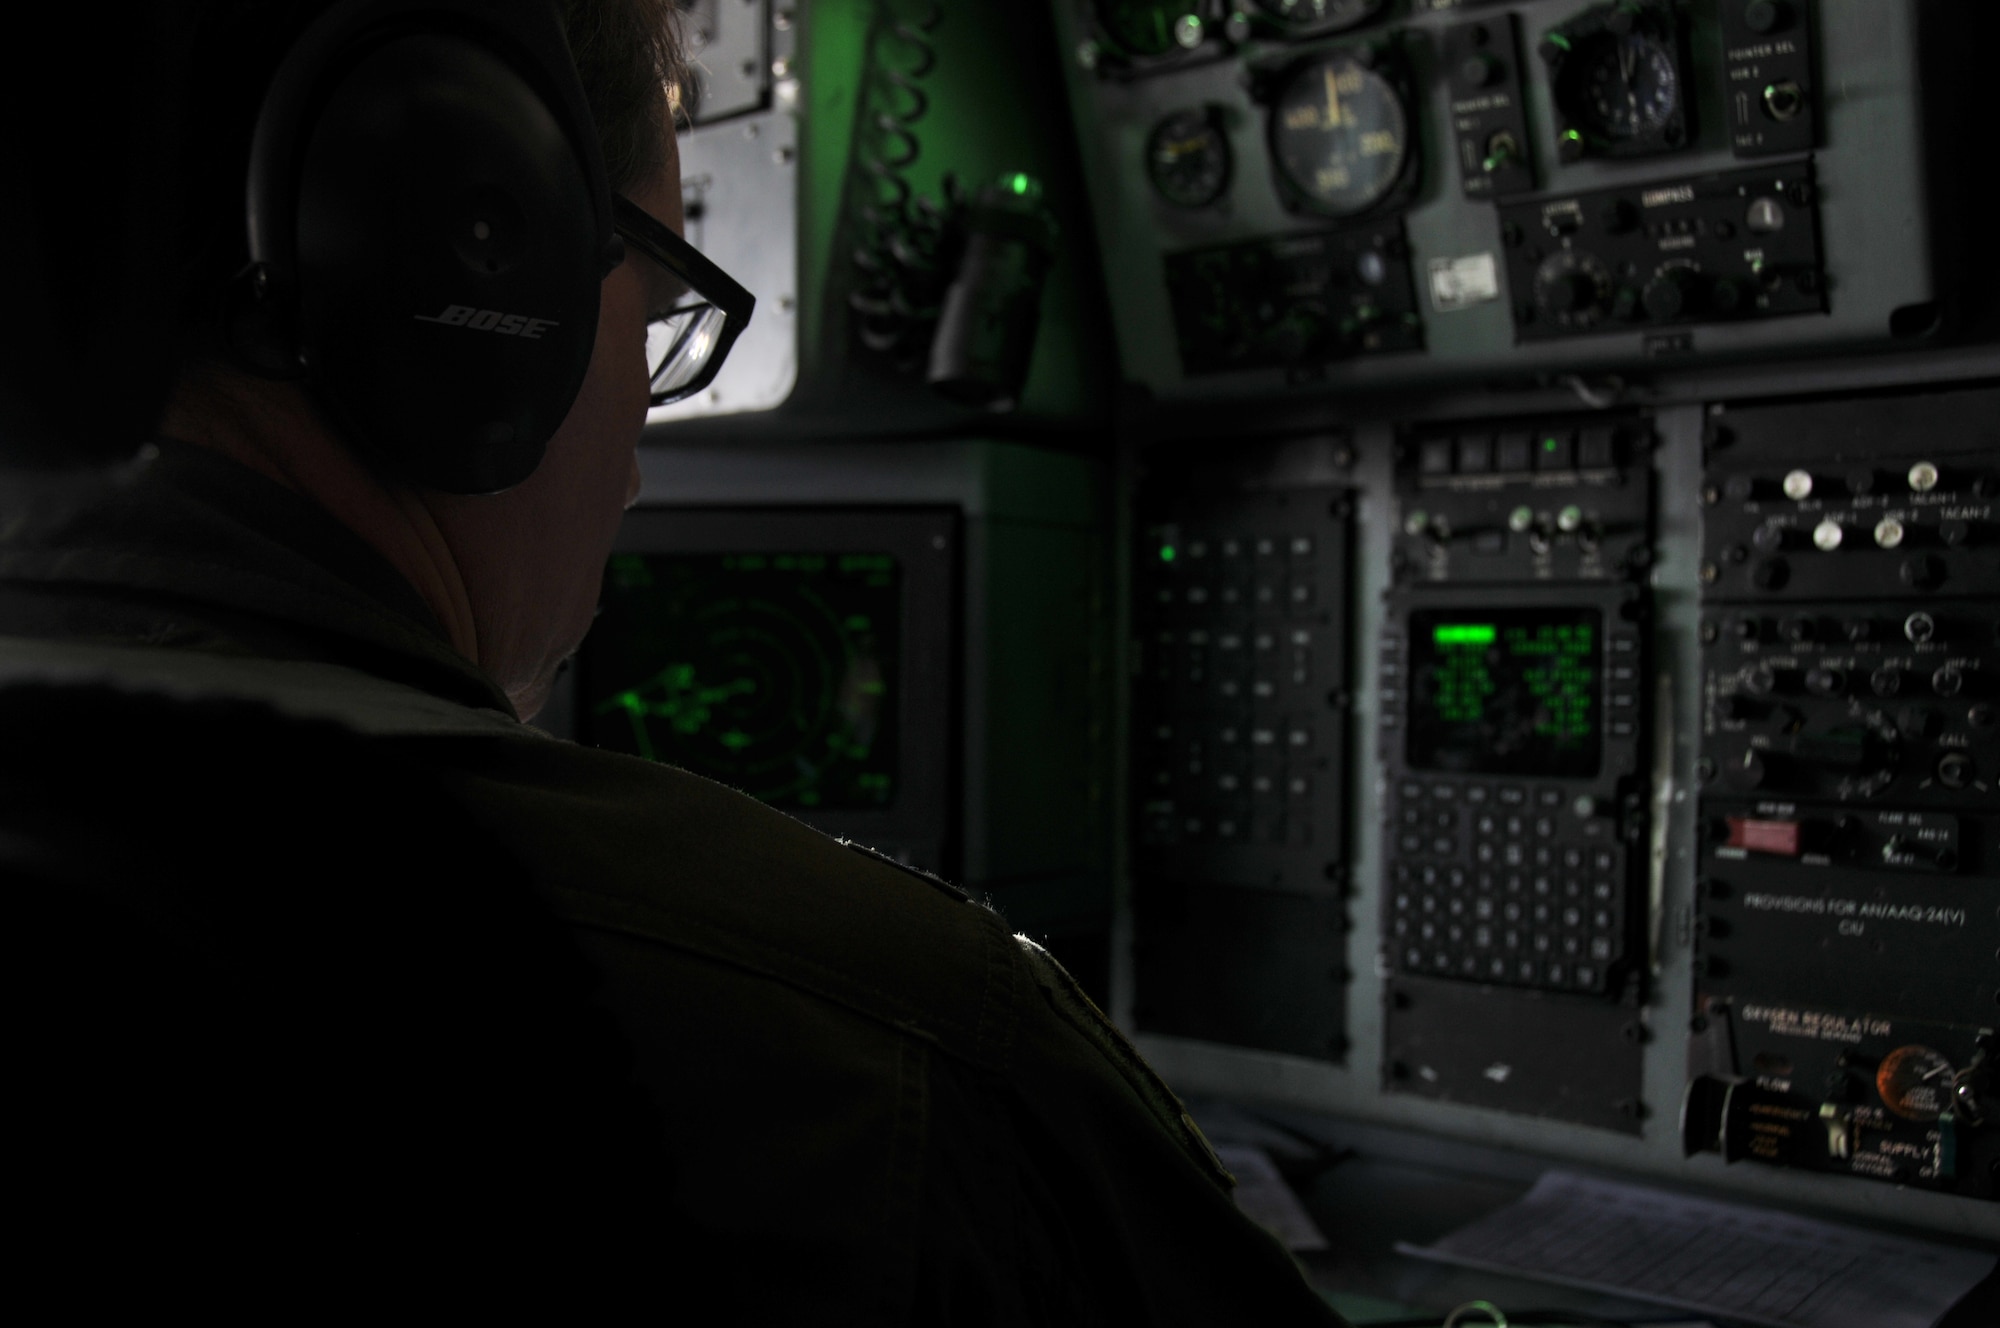 Lt. Col. Aldo Filoni, primary evaluator navigator with the 911th Operations Group, works during an all- weather airdrop delivery system exercise sortie in a C-130 Hercules in flight, near the drop zone in Cadiz, Ohio, March 7, 2015. This sortie simulated an airdrop in extremely reduced visibility conditions. (U.S. Air Force photo by Senior Airman Marjorie A. Bowlden)

